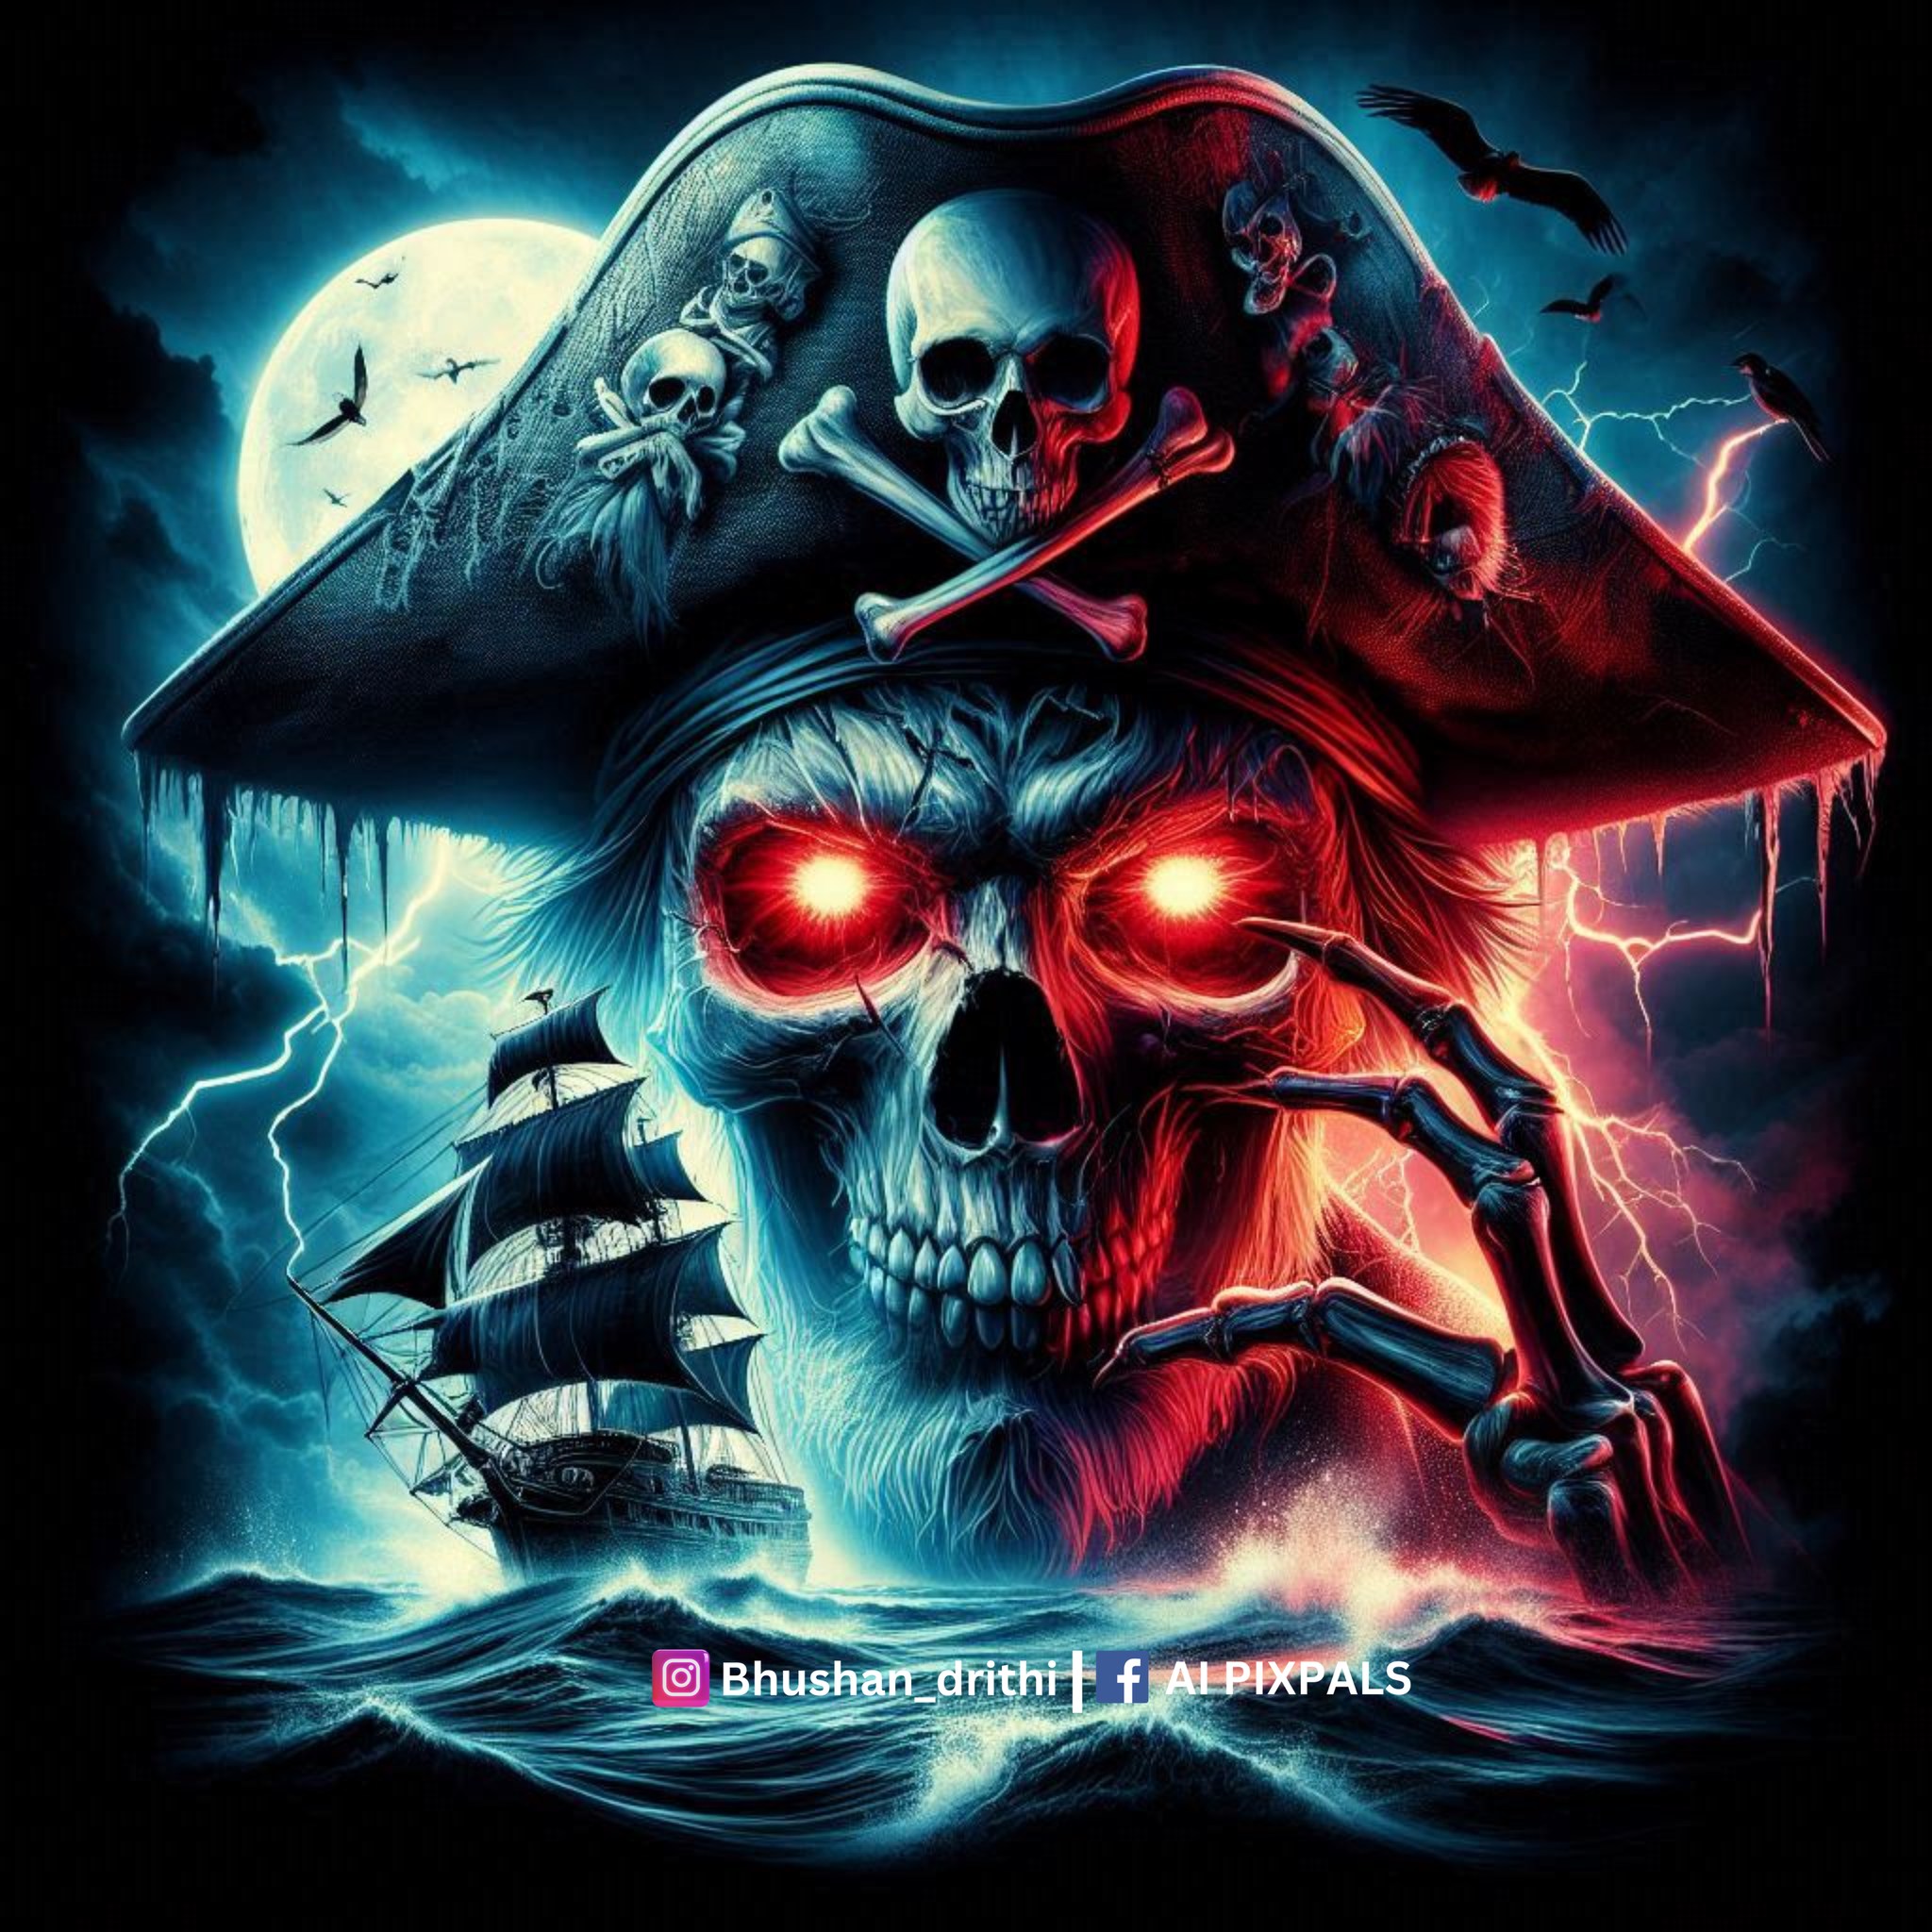 ** Haunting pirate specter with glowing red eyes, ghostly ship within, and storm...